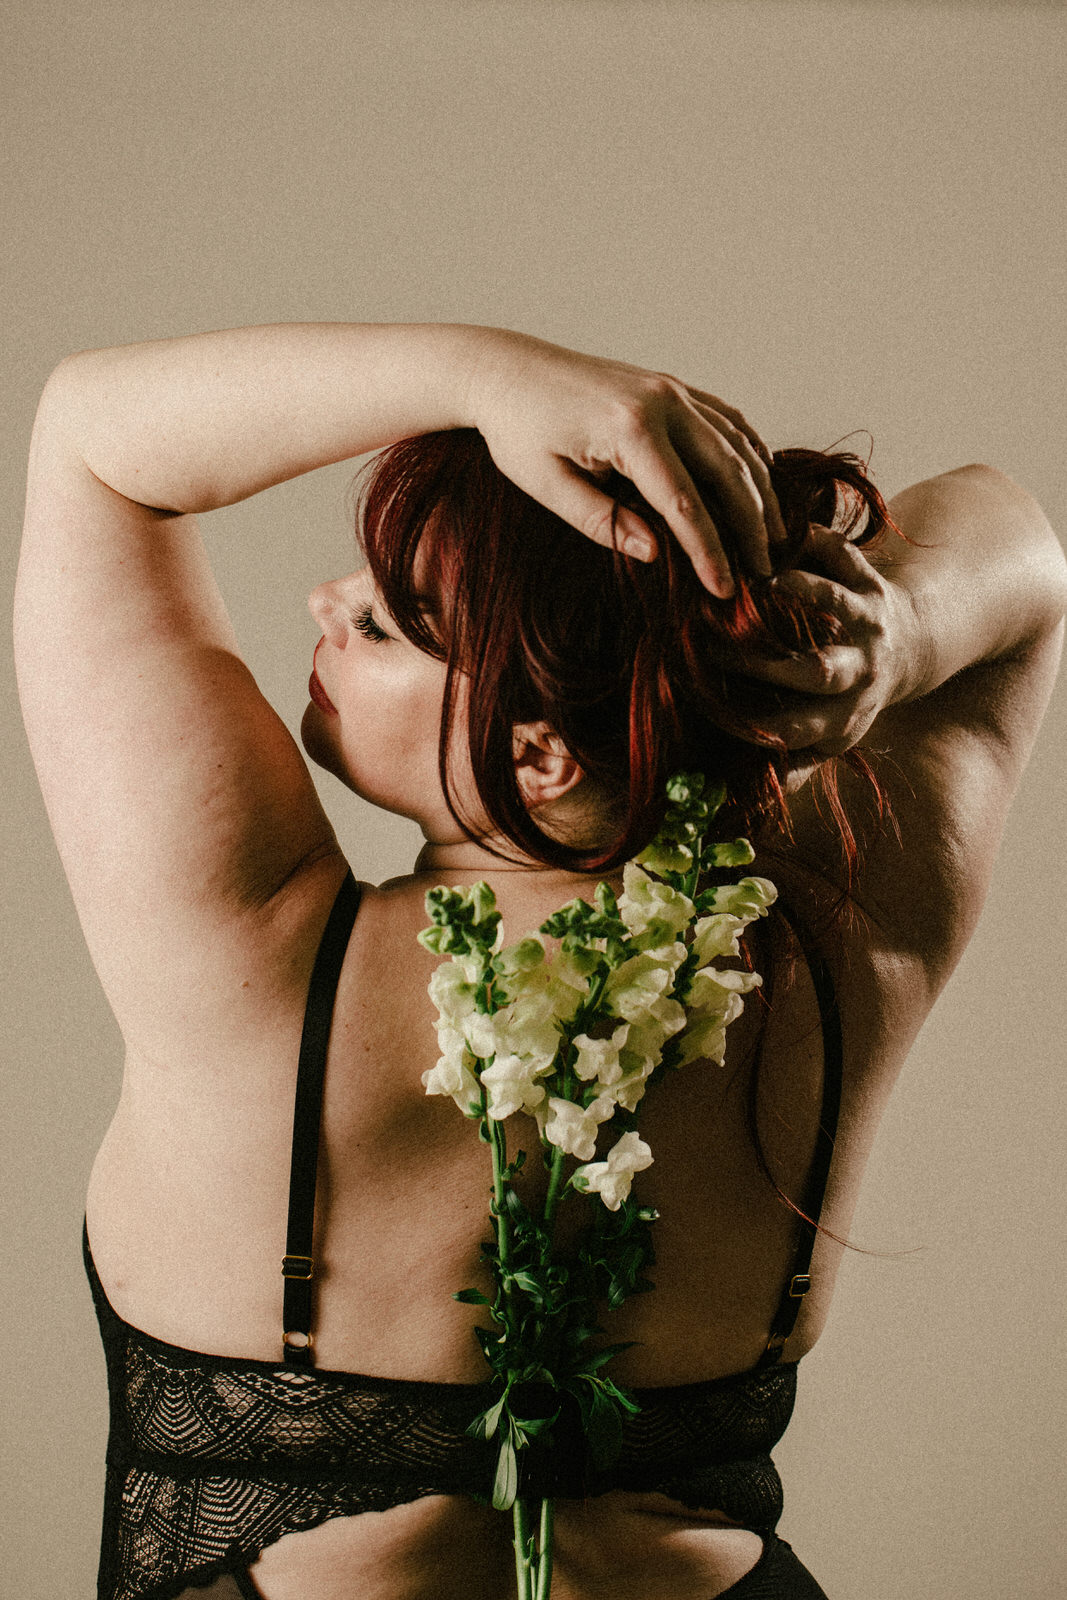 Boudoir photo of woman's back reaching up to her head and holding flowers hanging down her back